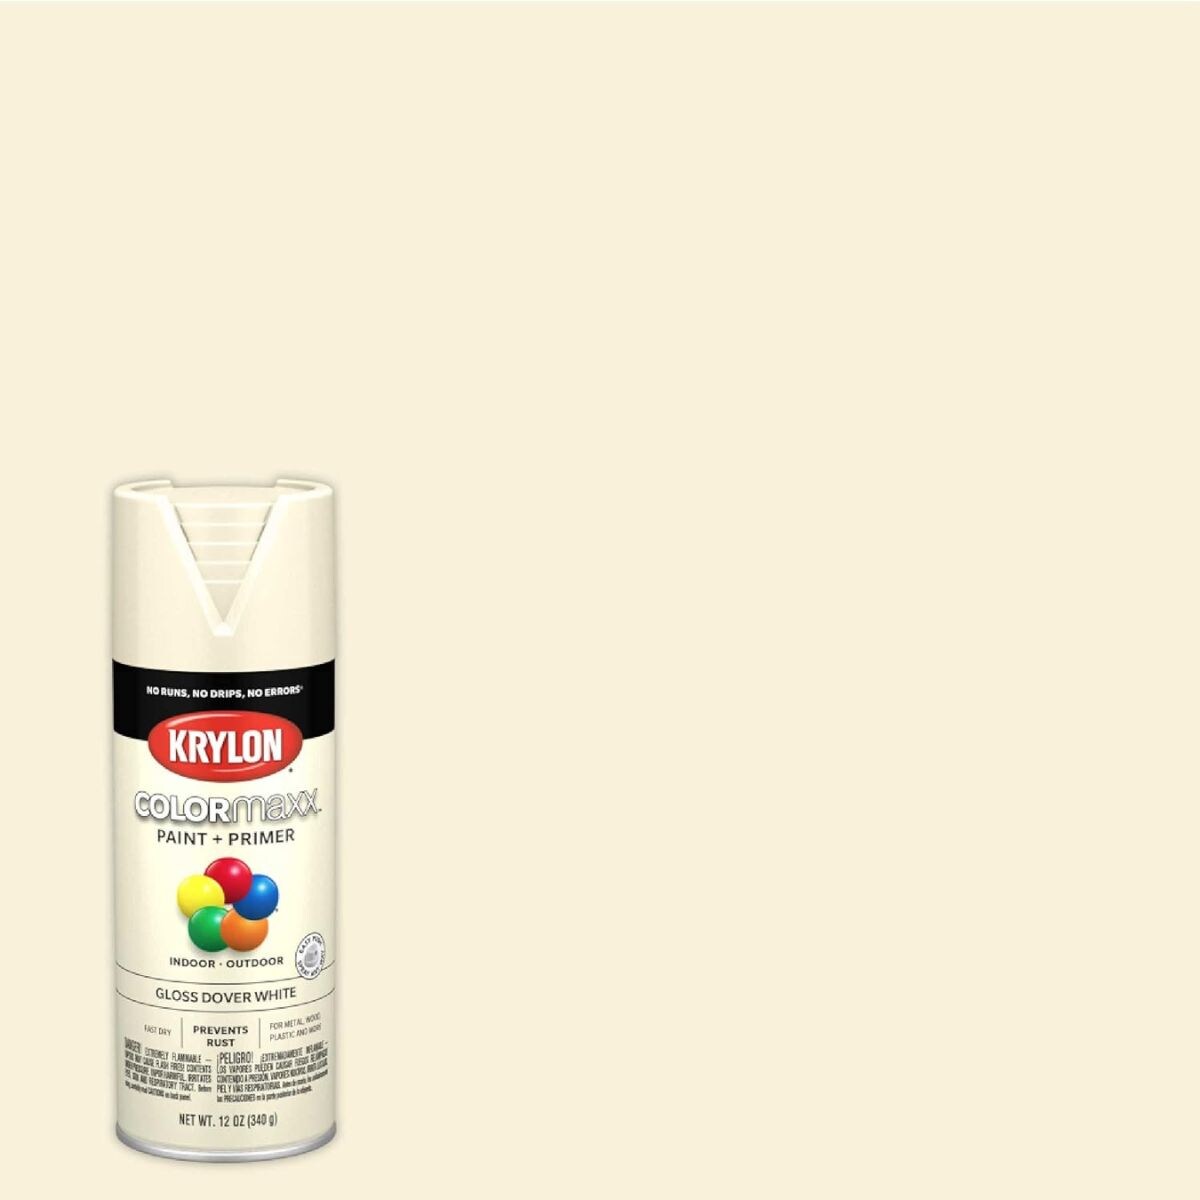 Krylon Spray Paint and Primer for Indoor/Outdoor Use